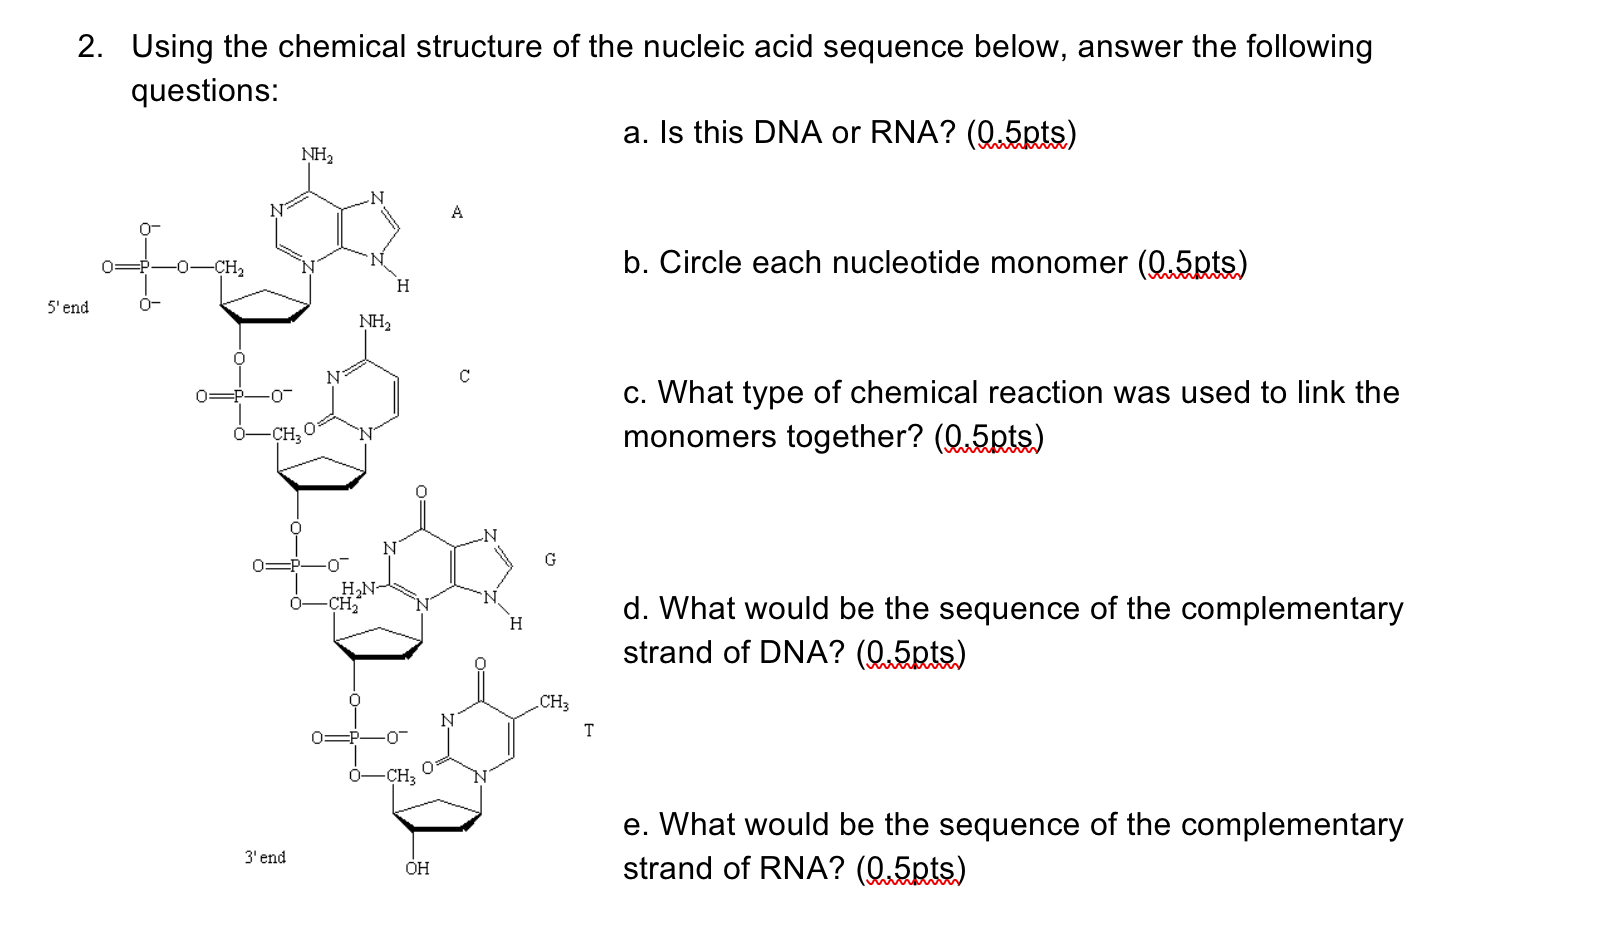 nucleic acid chemical structure dna